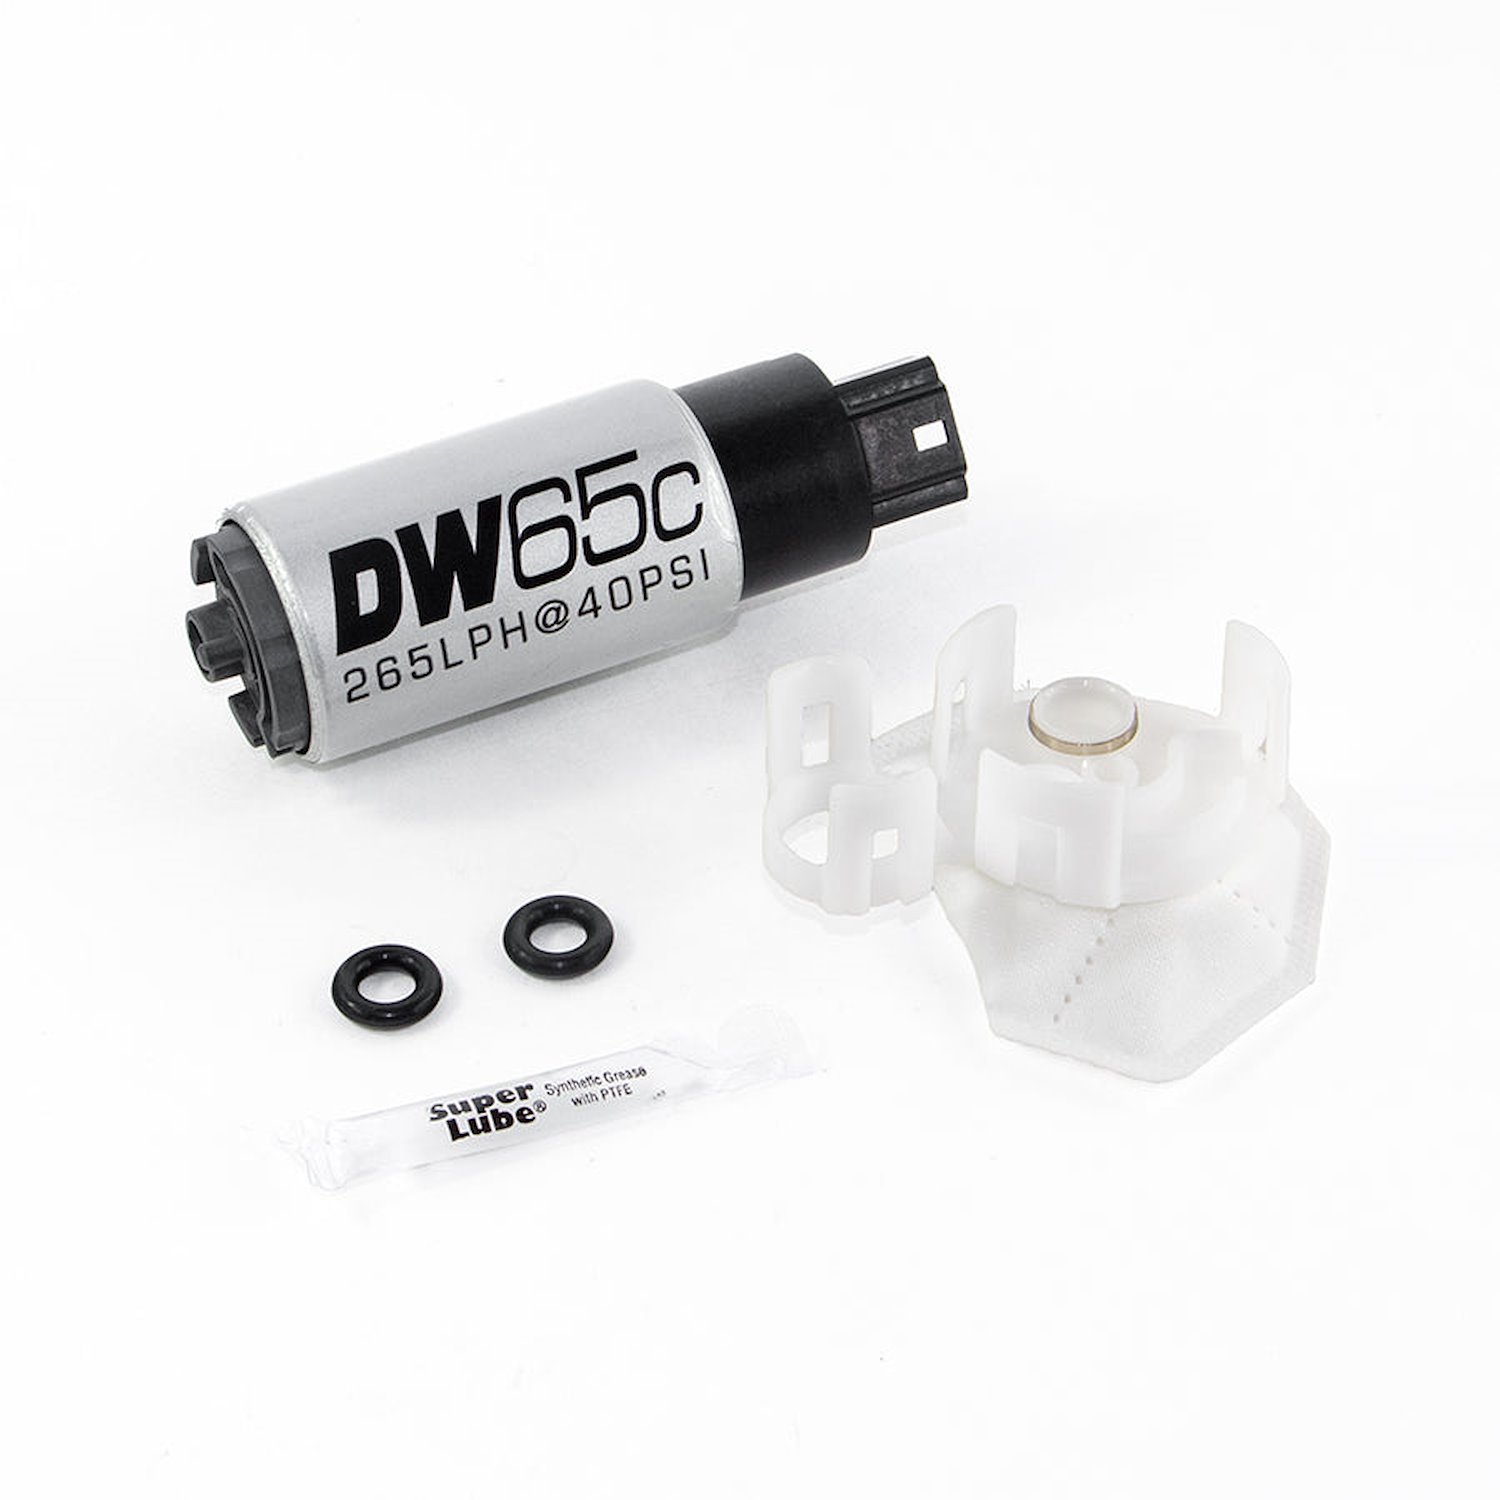 96511026 DW65C 265lph Compact Fuel Pump with Install Kit